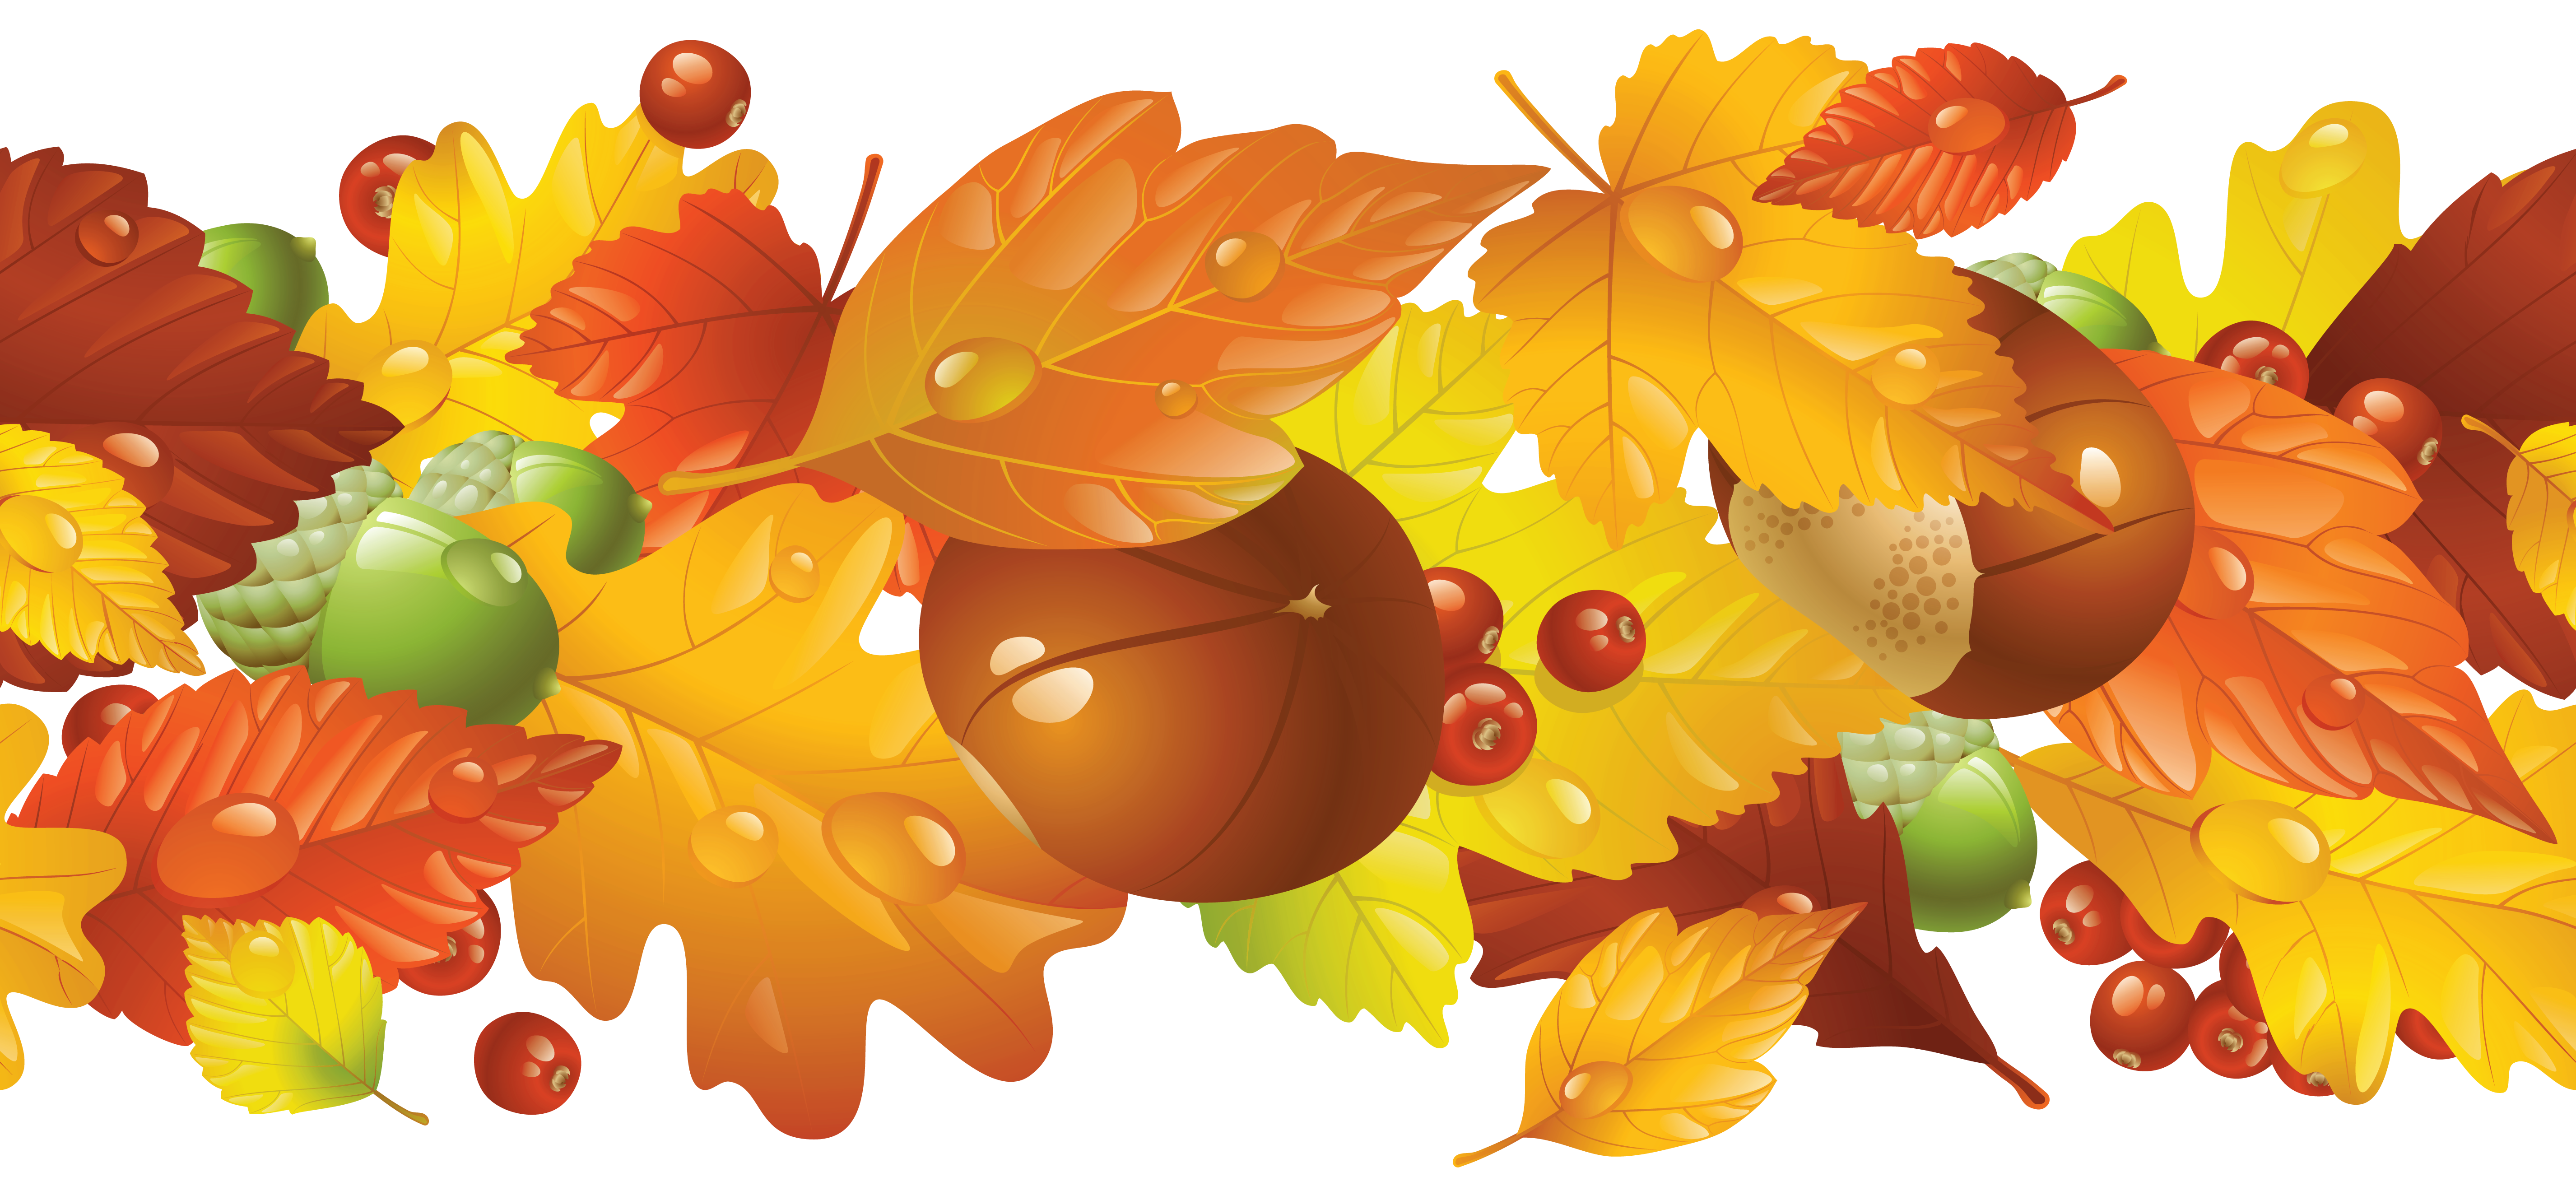 Transparent Fall Border PNG Clipart Picture - Cliparts.co